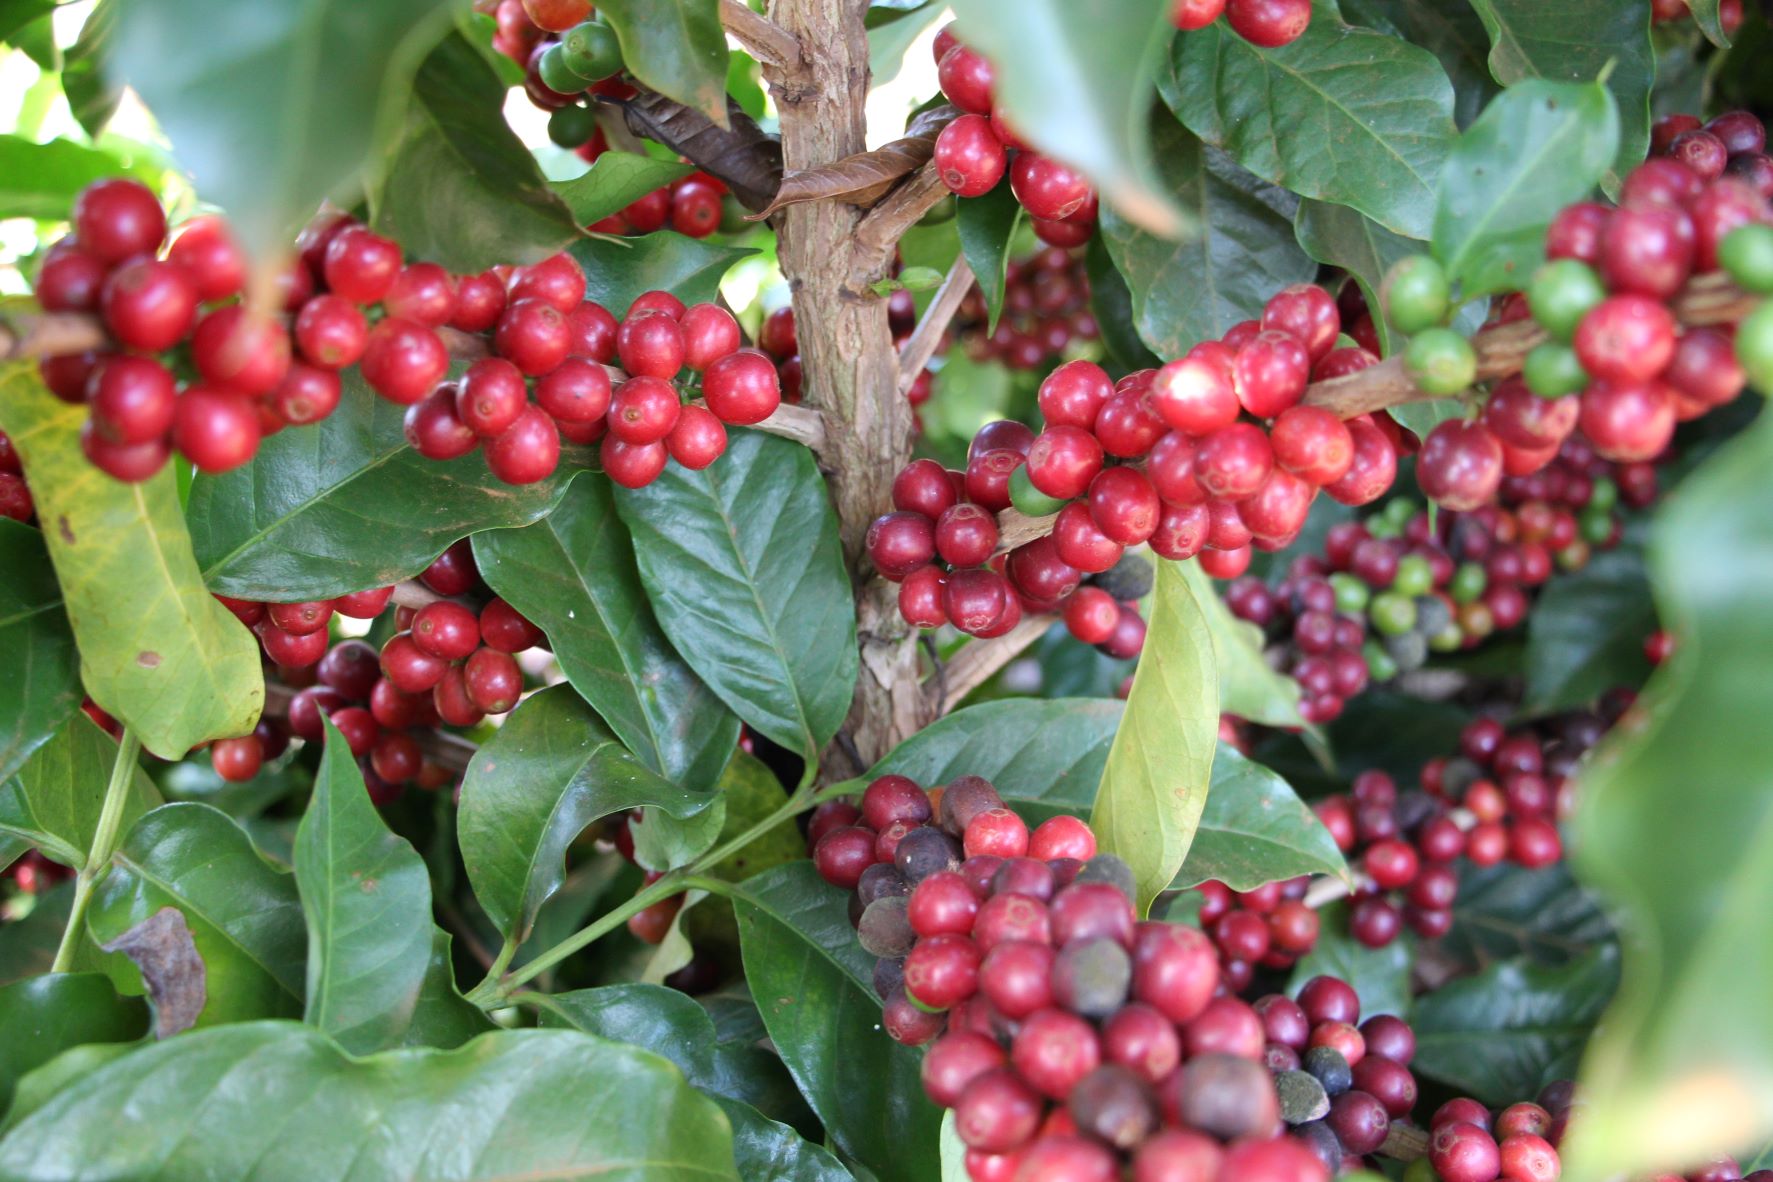 Lower temperatures and moist soils may favor the quality of the next coffee harvest